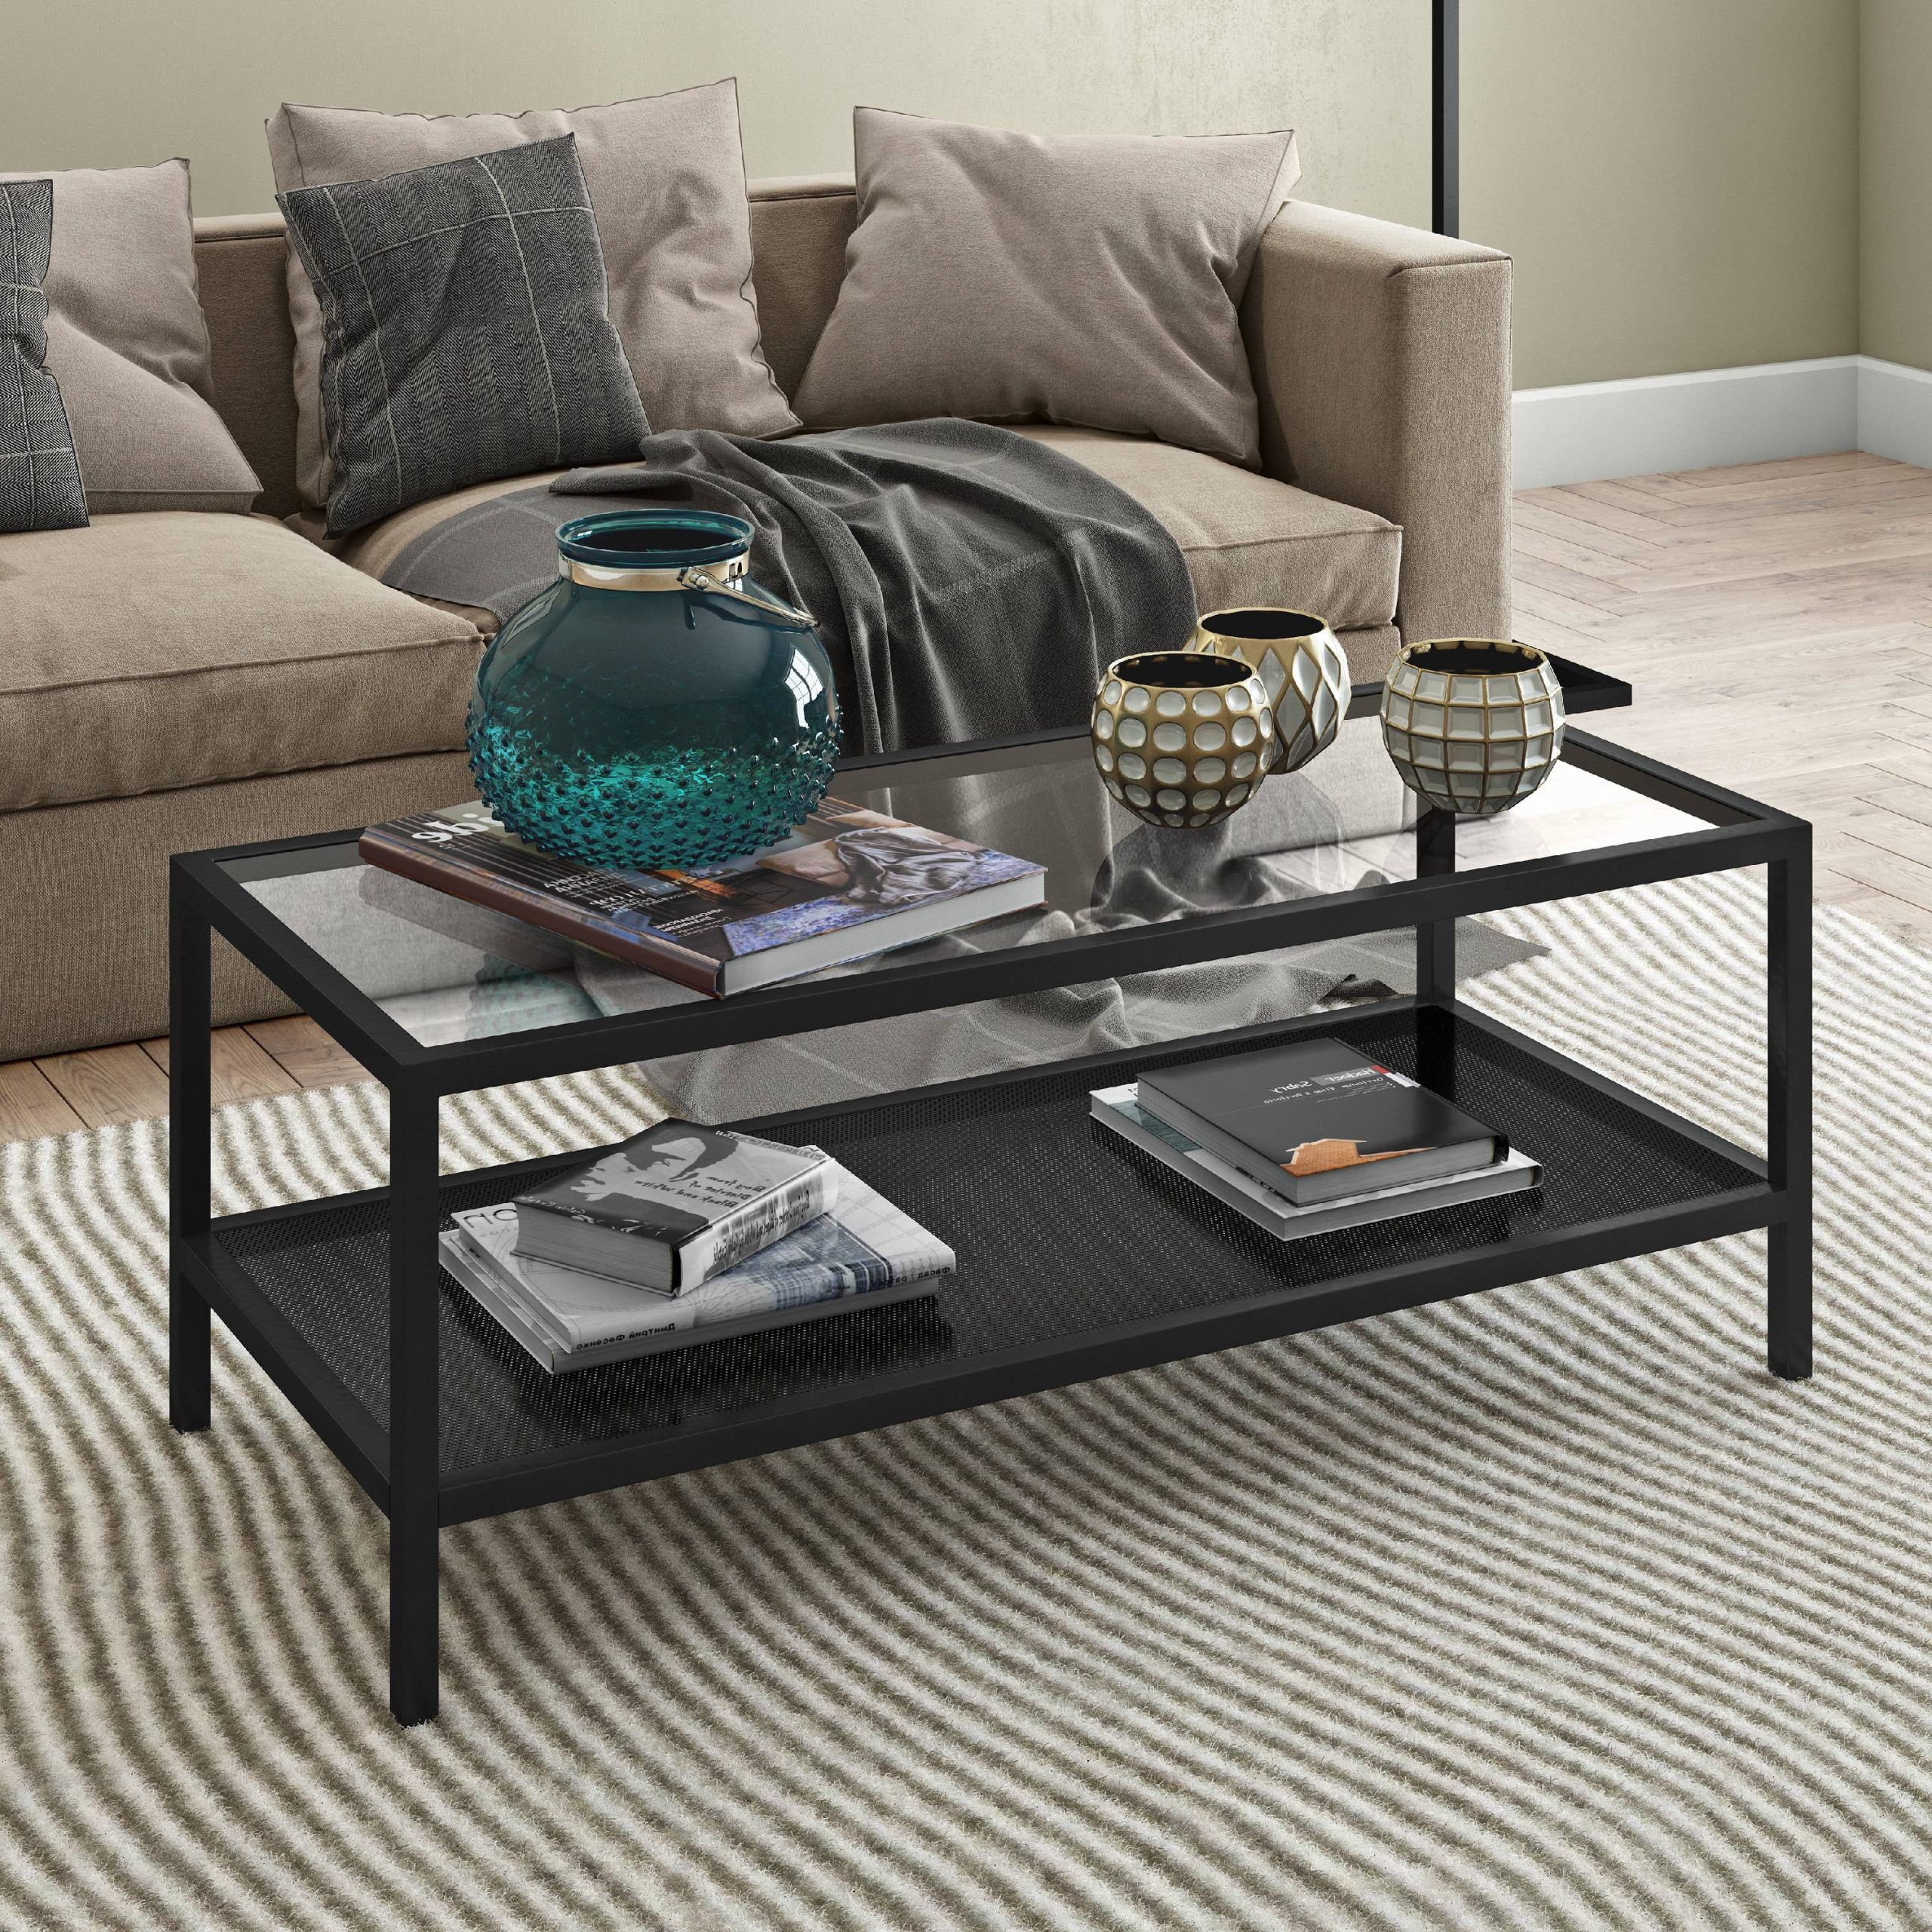 Evelyn&zoe Contemporary Metal Coffee Table With Glass Top – Walmart Throughout Studio 350 Black Metal Coffee Tables (View 14 of 20)